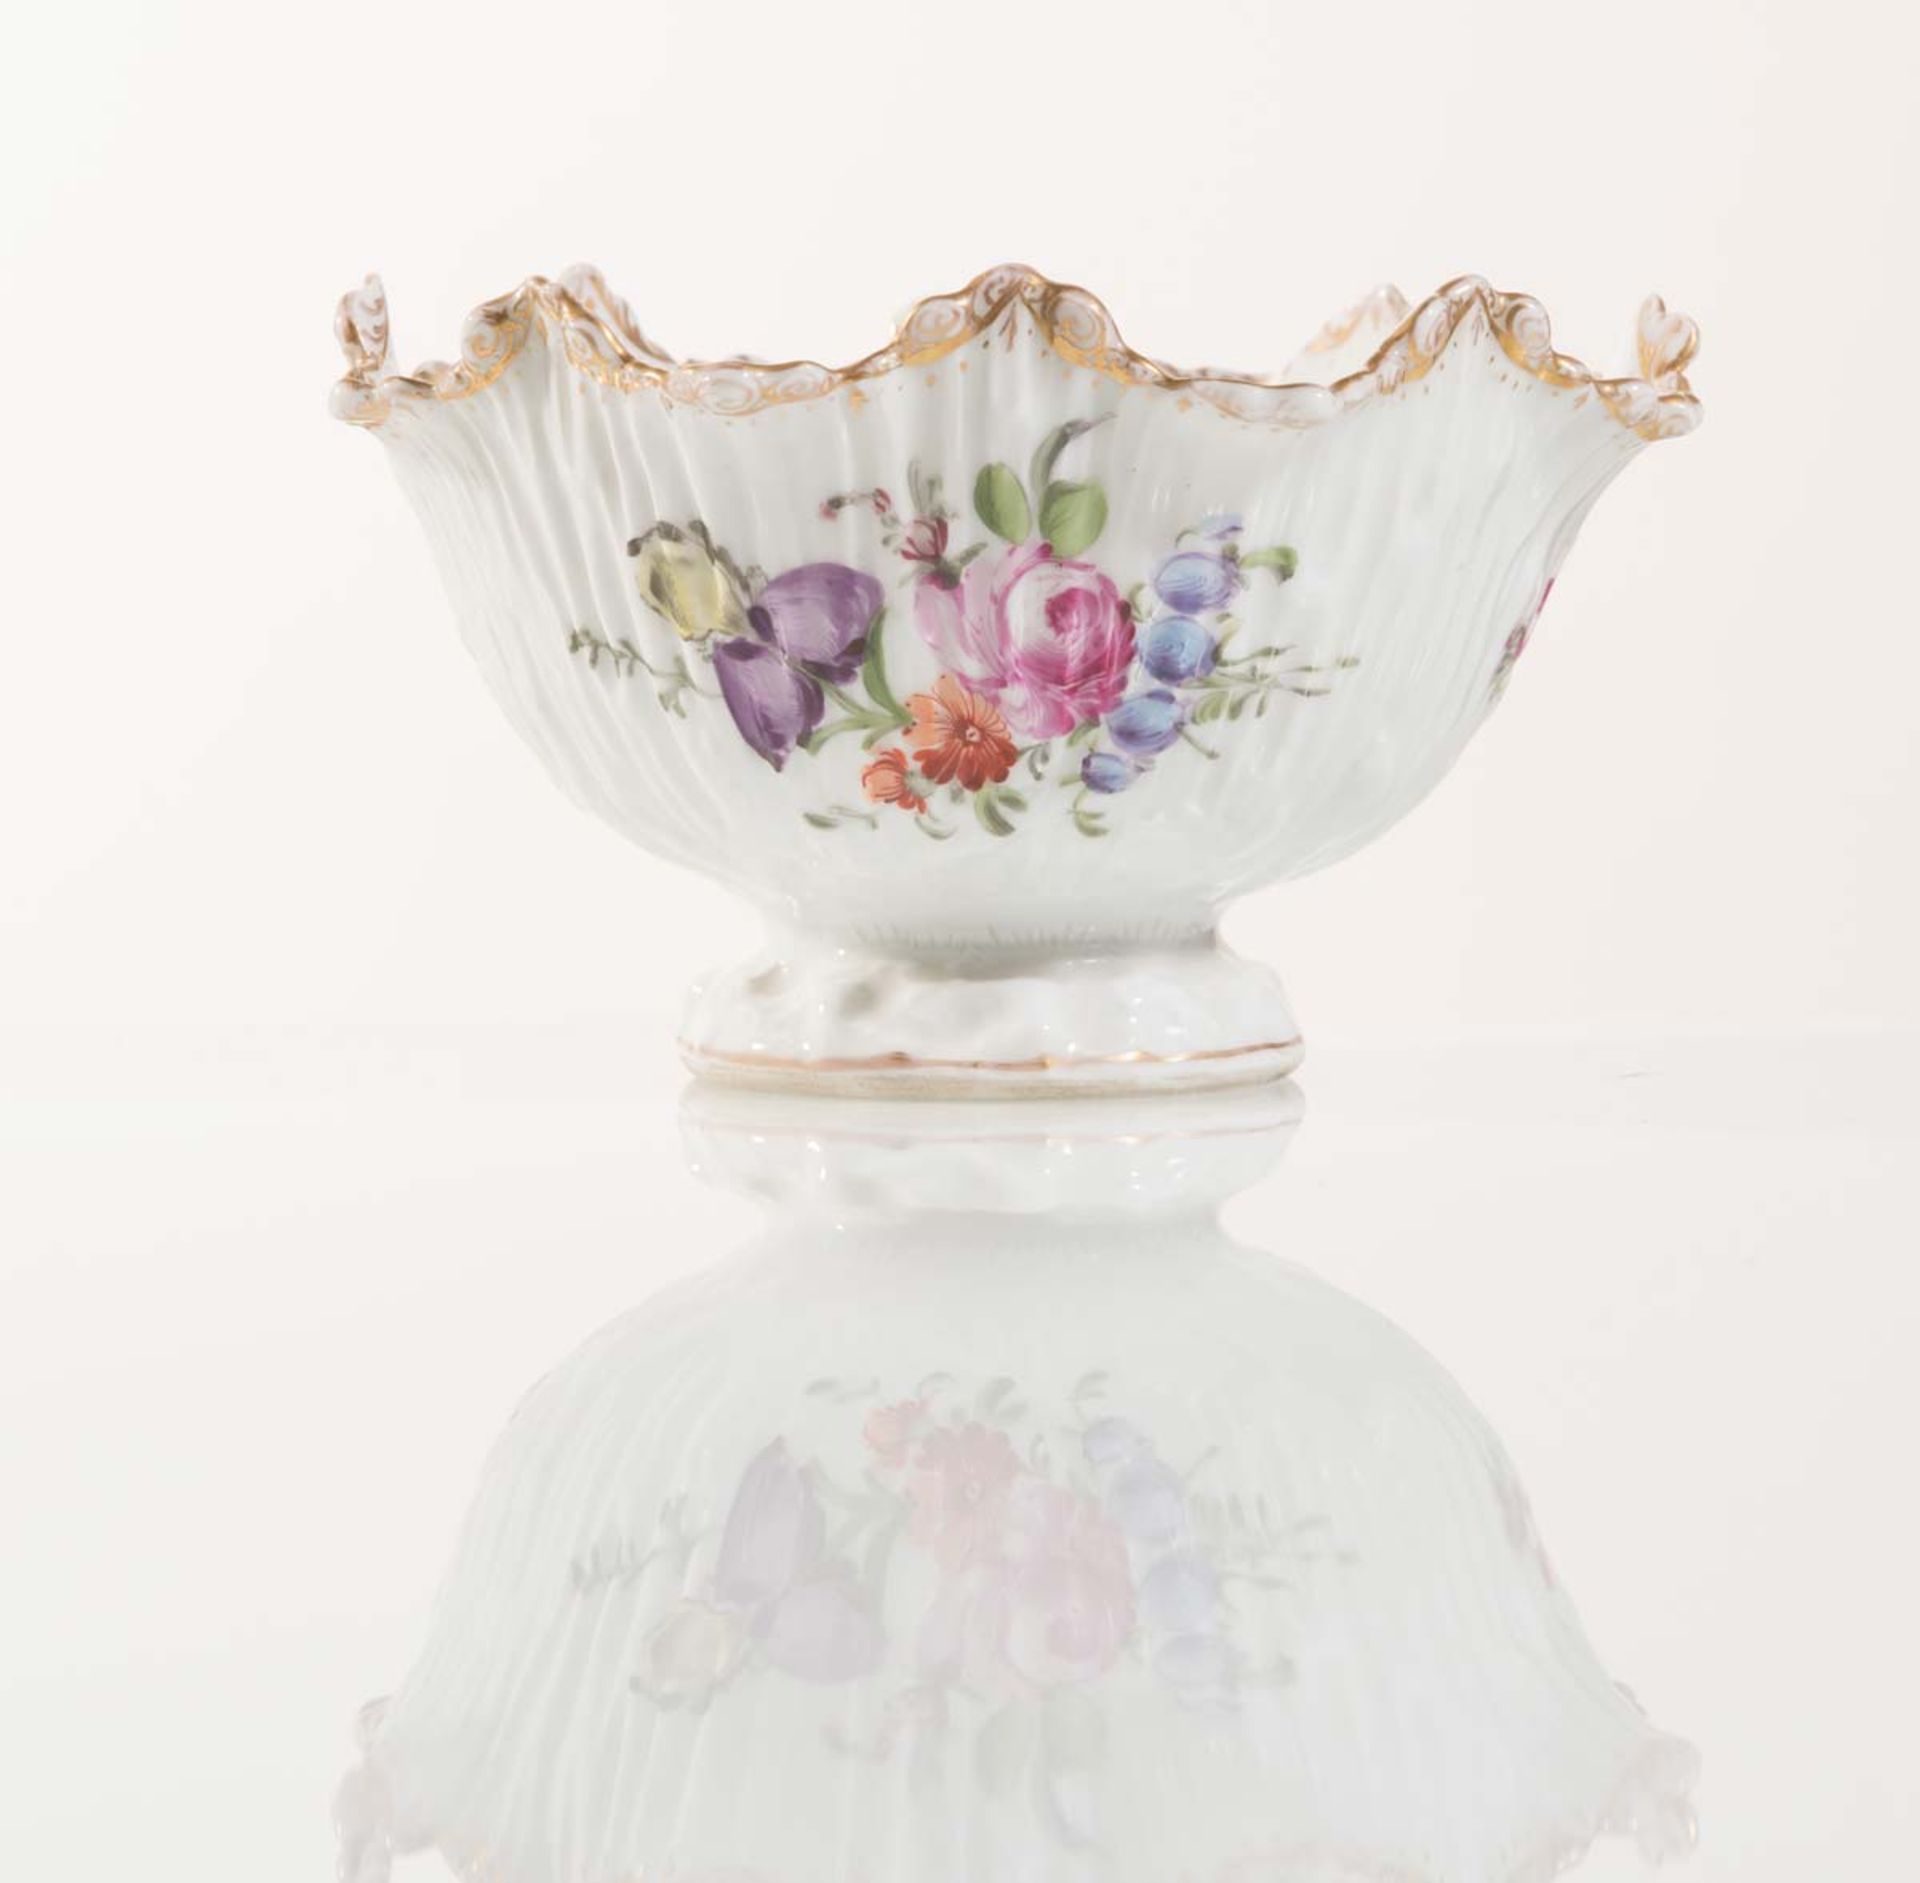 White porcelain with polychrome decorations bowl, Germany, late 19th Century.